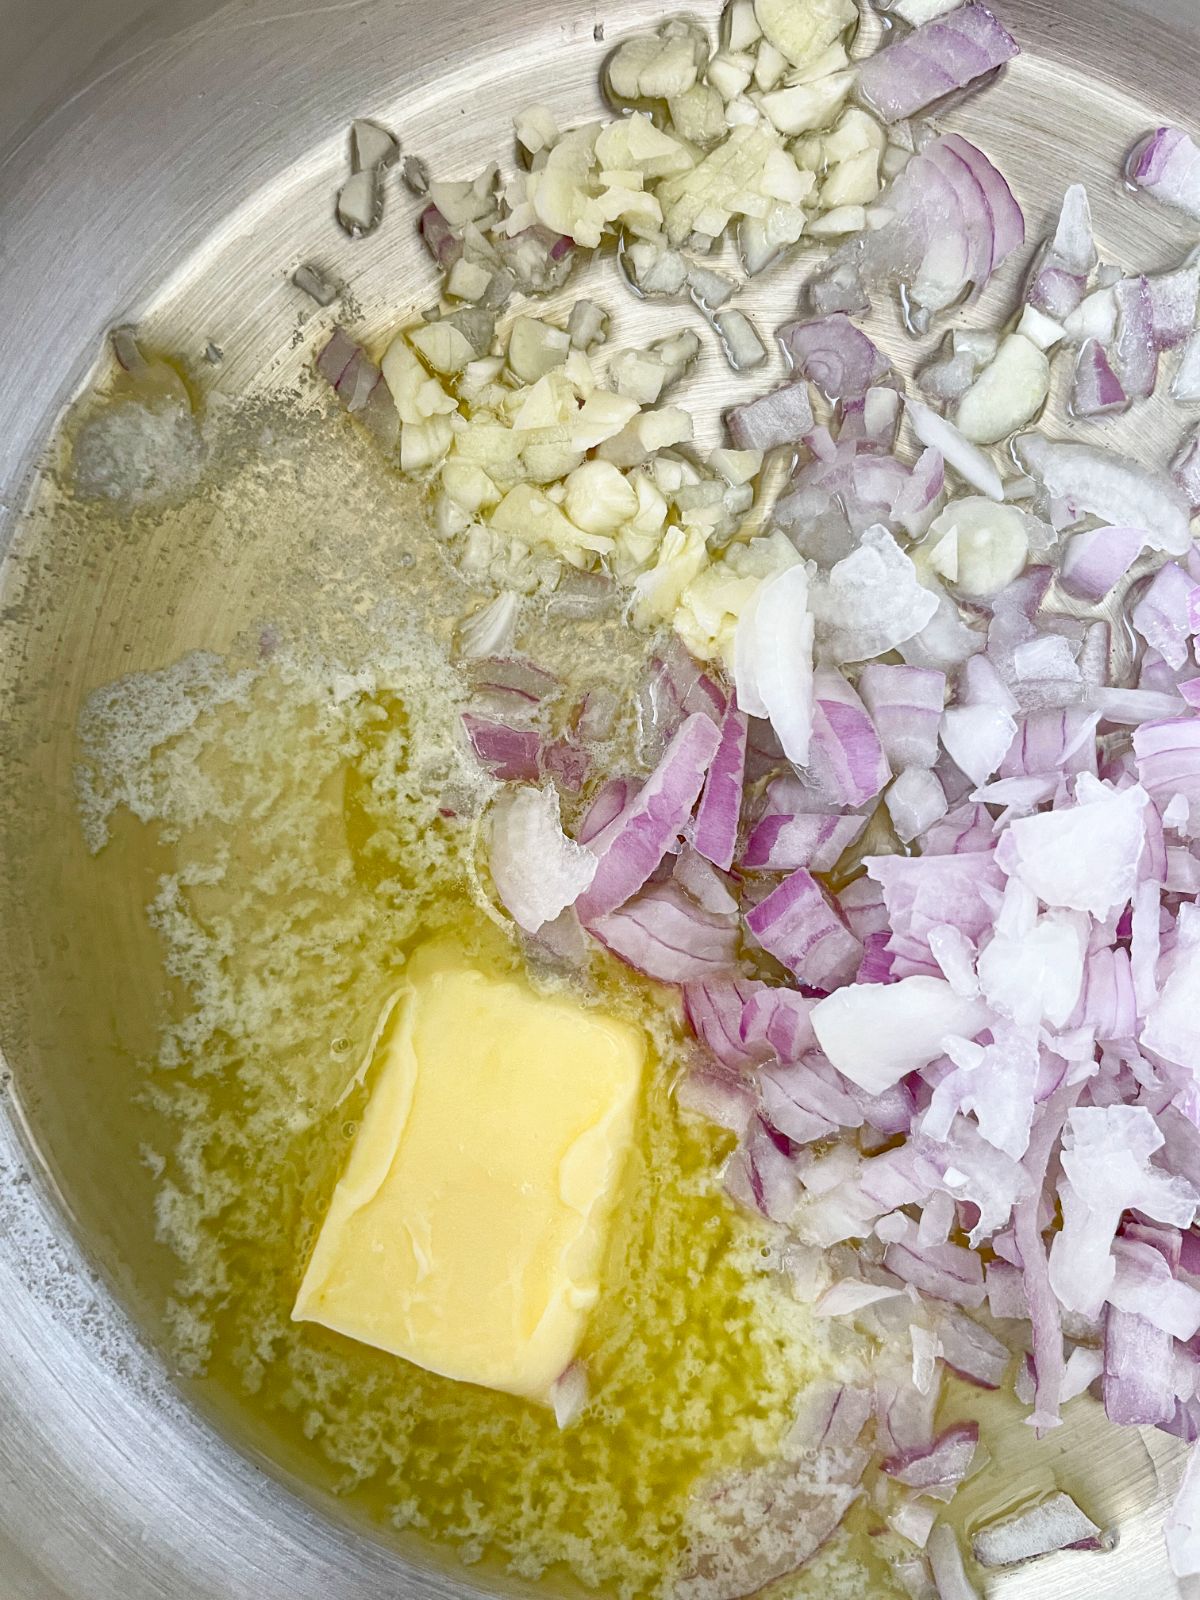 saute chopped onions and garlic in butter 